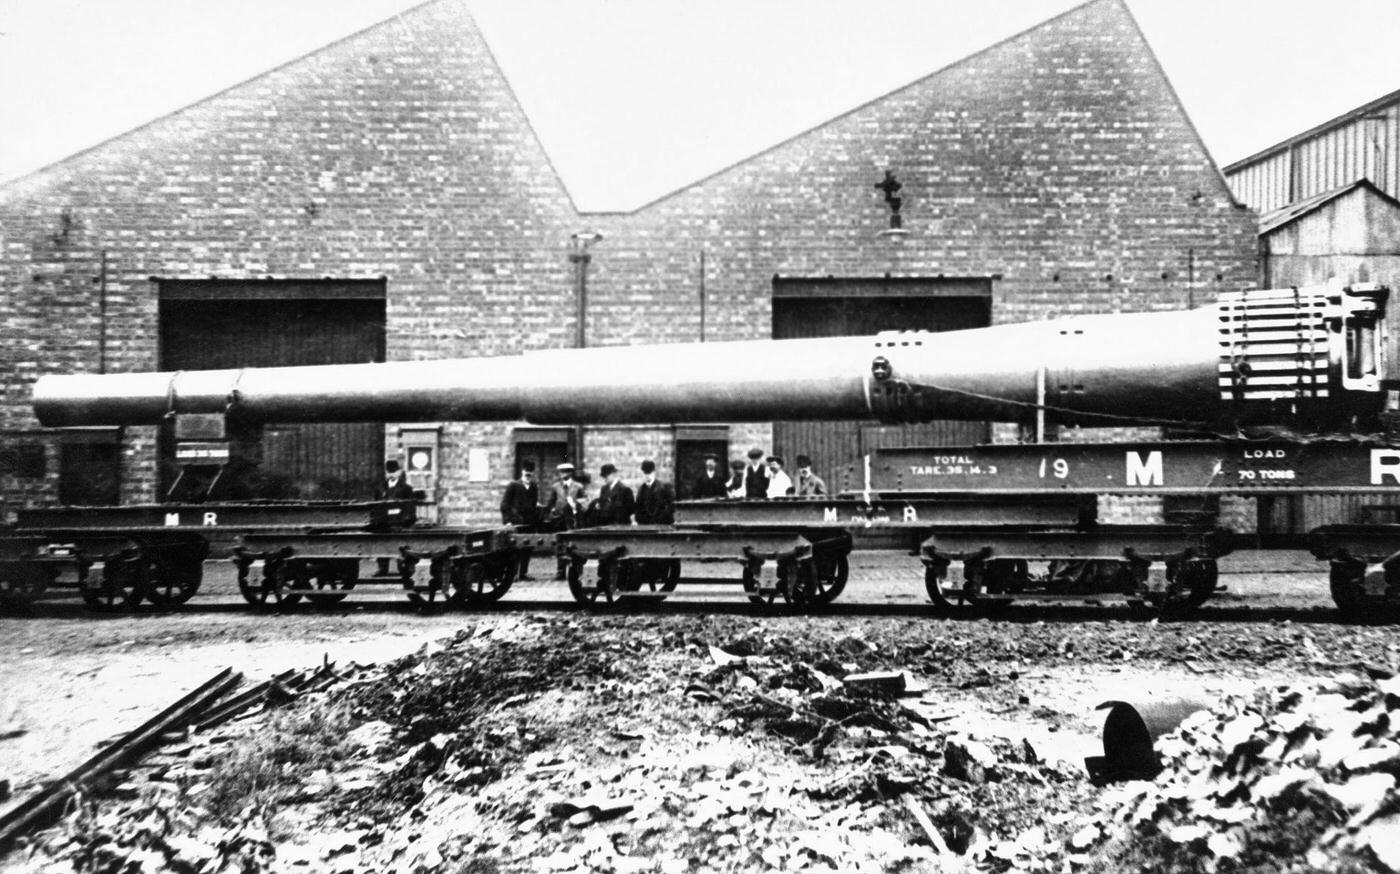 Loading a 15' naval gun onto a waiting train at The Royal Ordnance Works in Coventry, 1915.